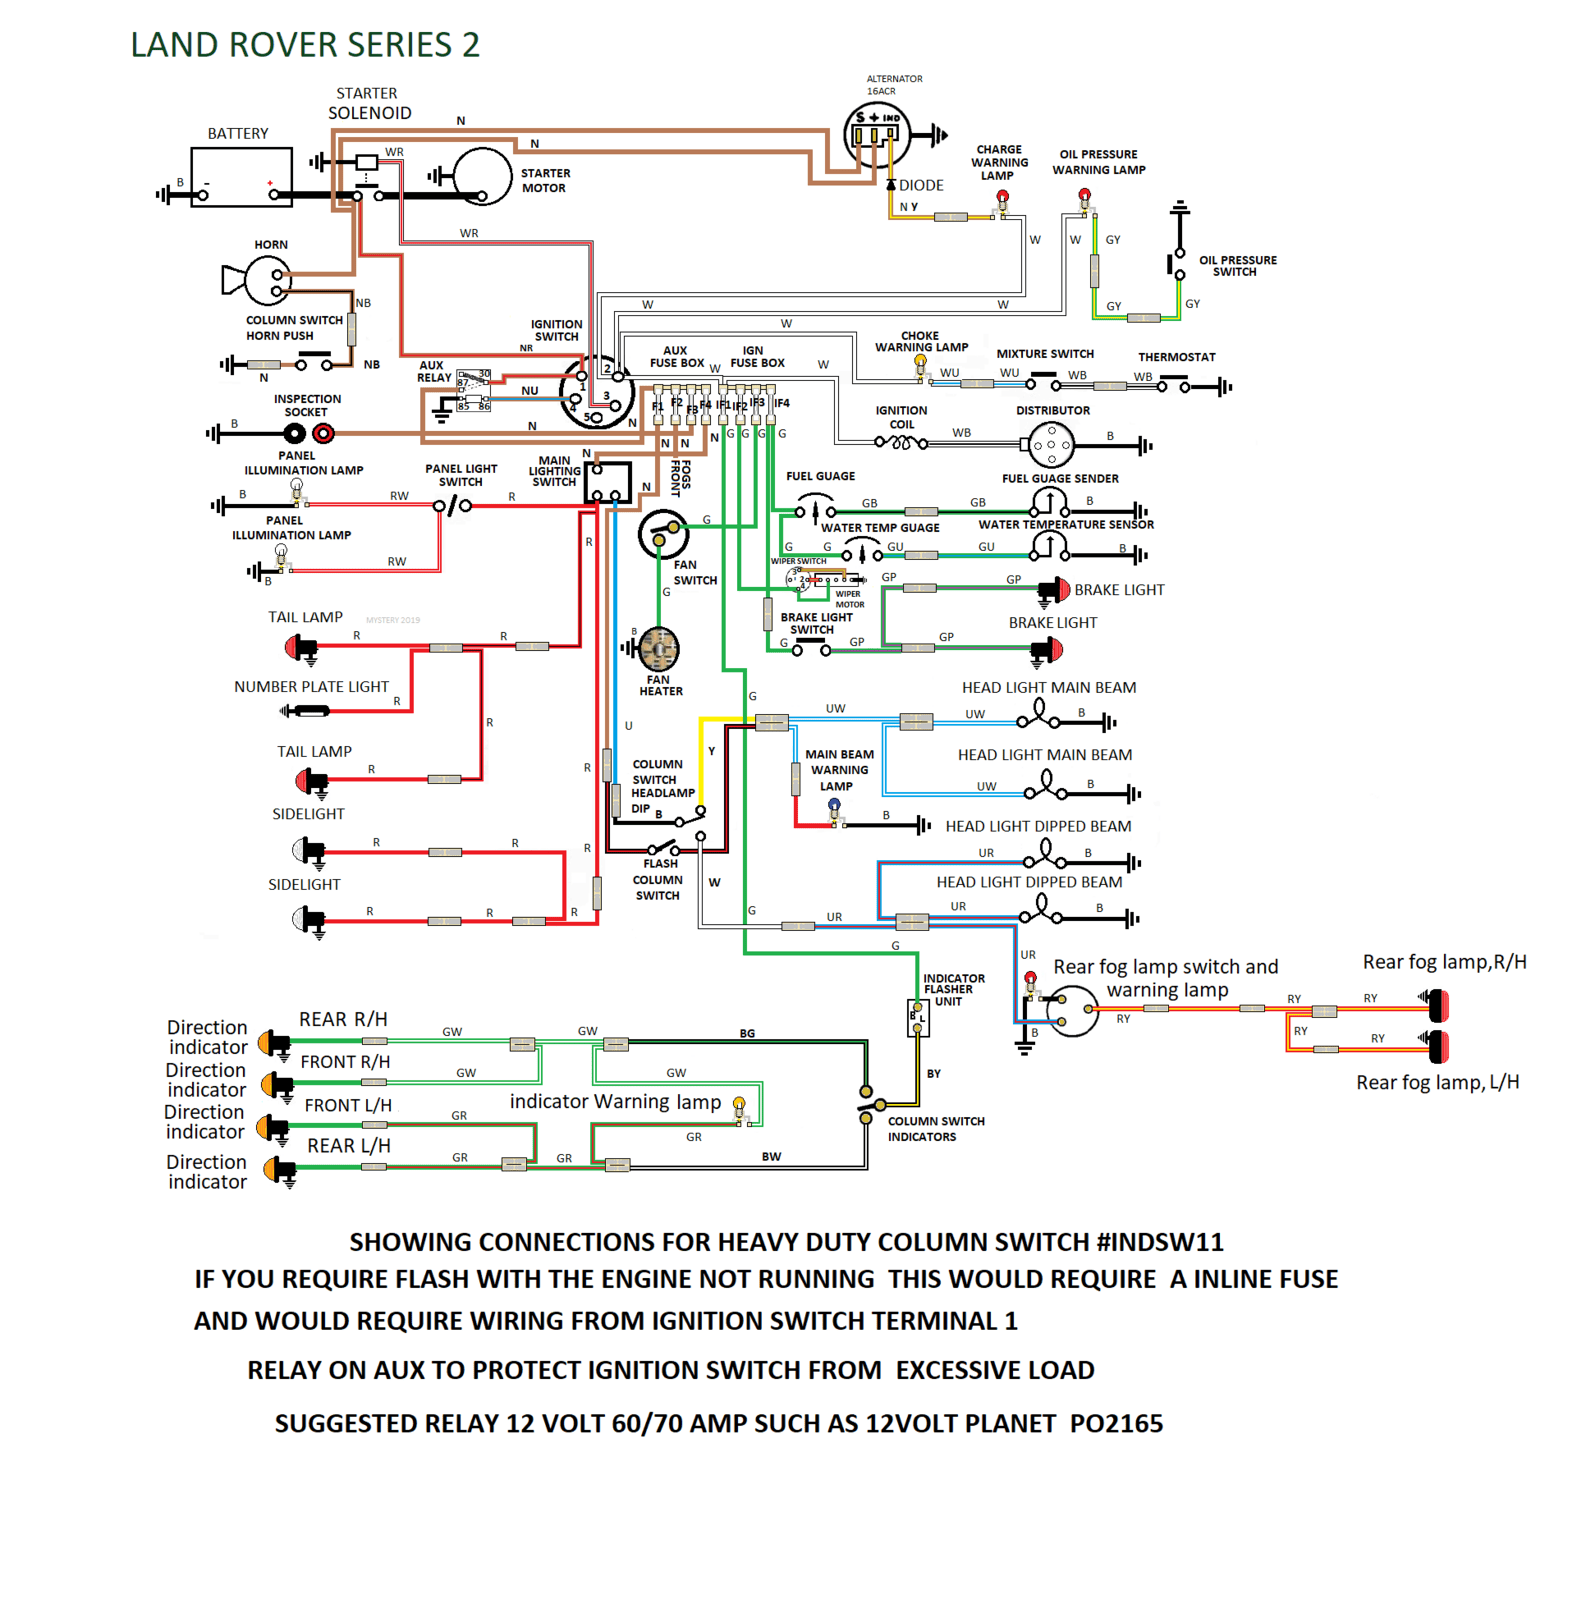 column switch RELAY.png